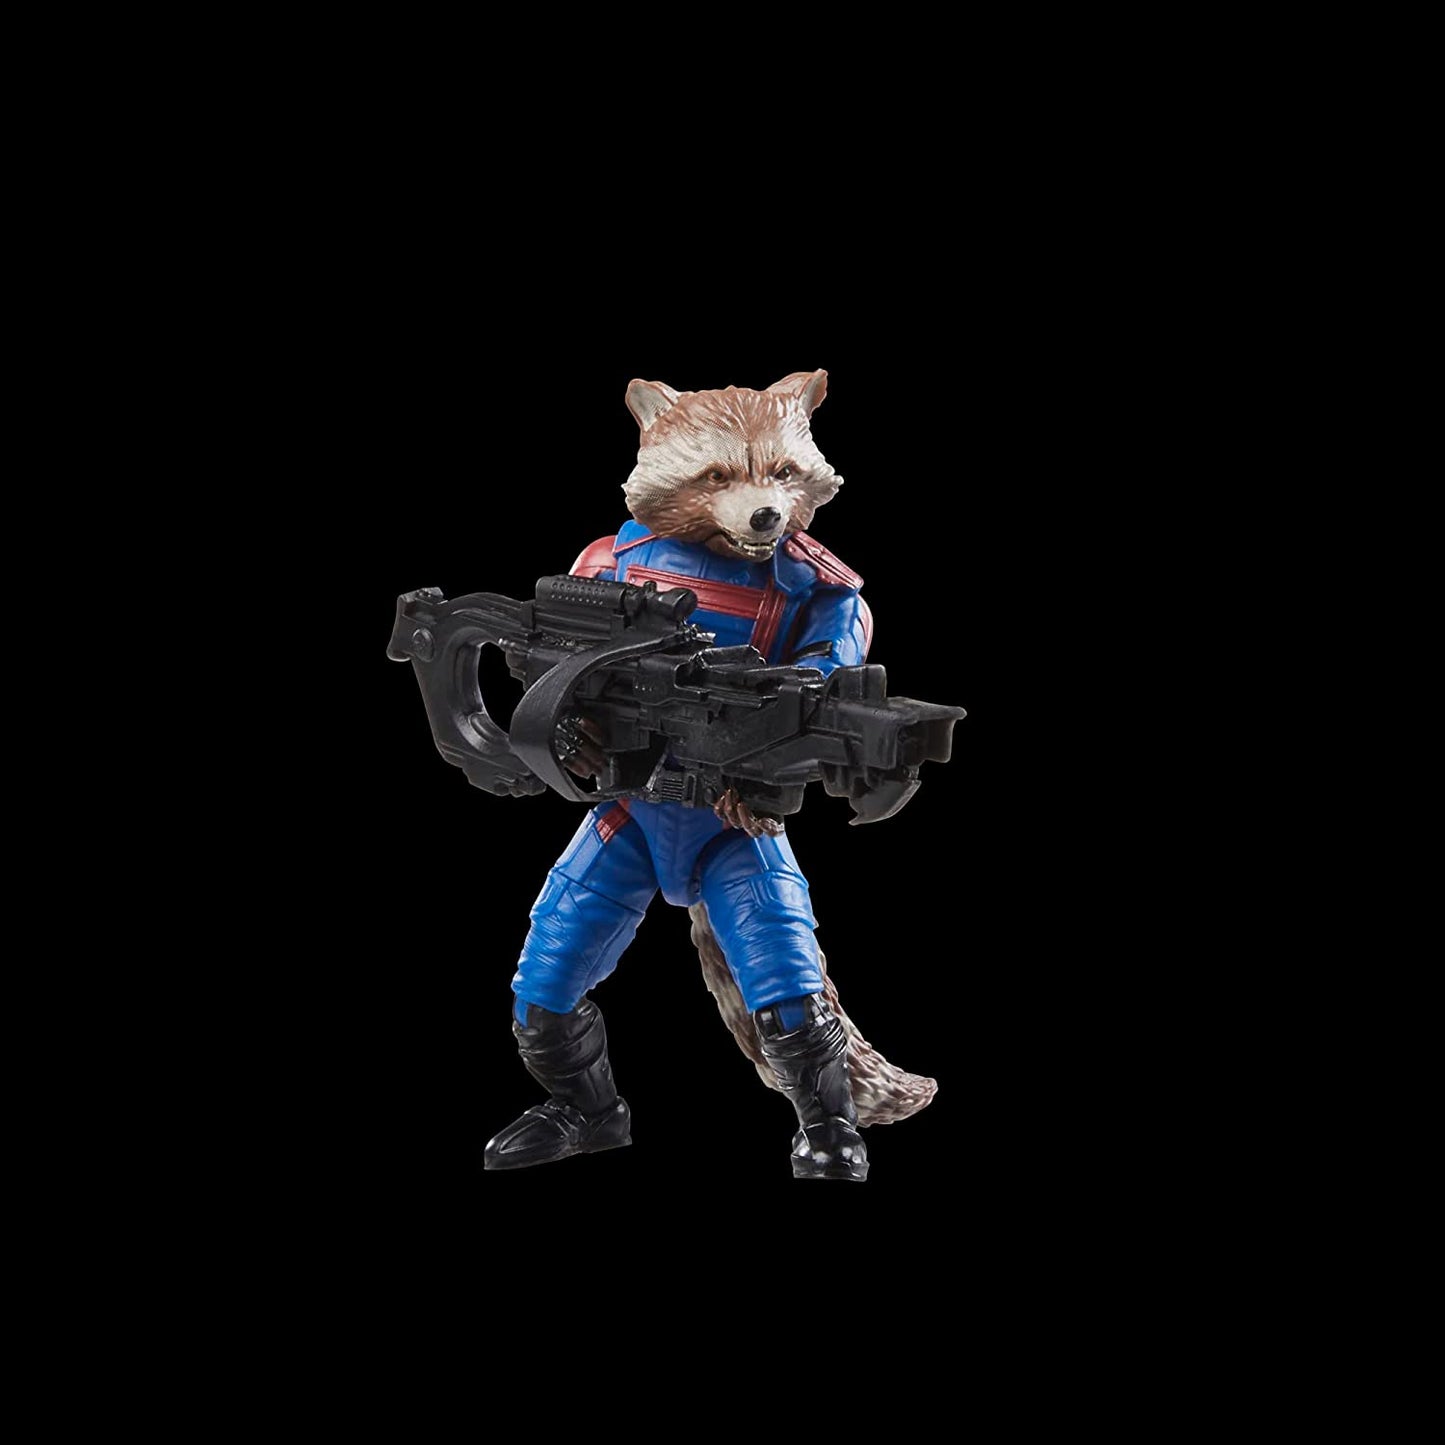 Guardians of The Galaxy Vol. 3 Marvel Legends Rocket 6-Inch Action Figure Toy pose - Heretoserveyou